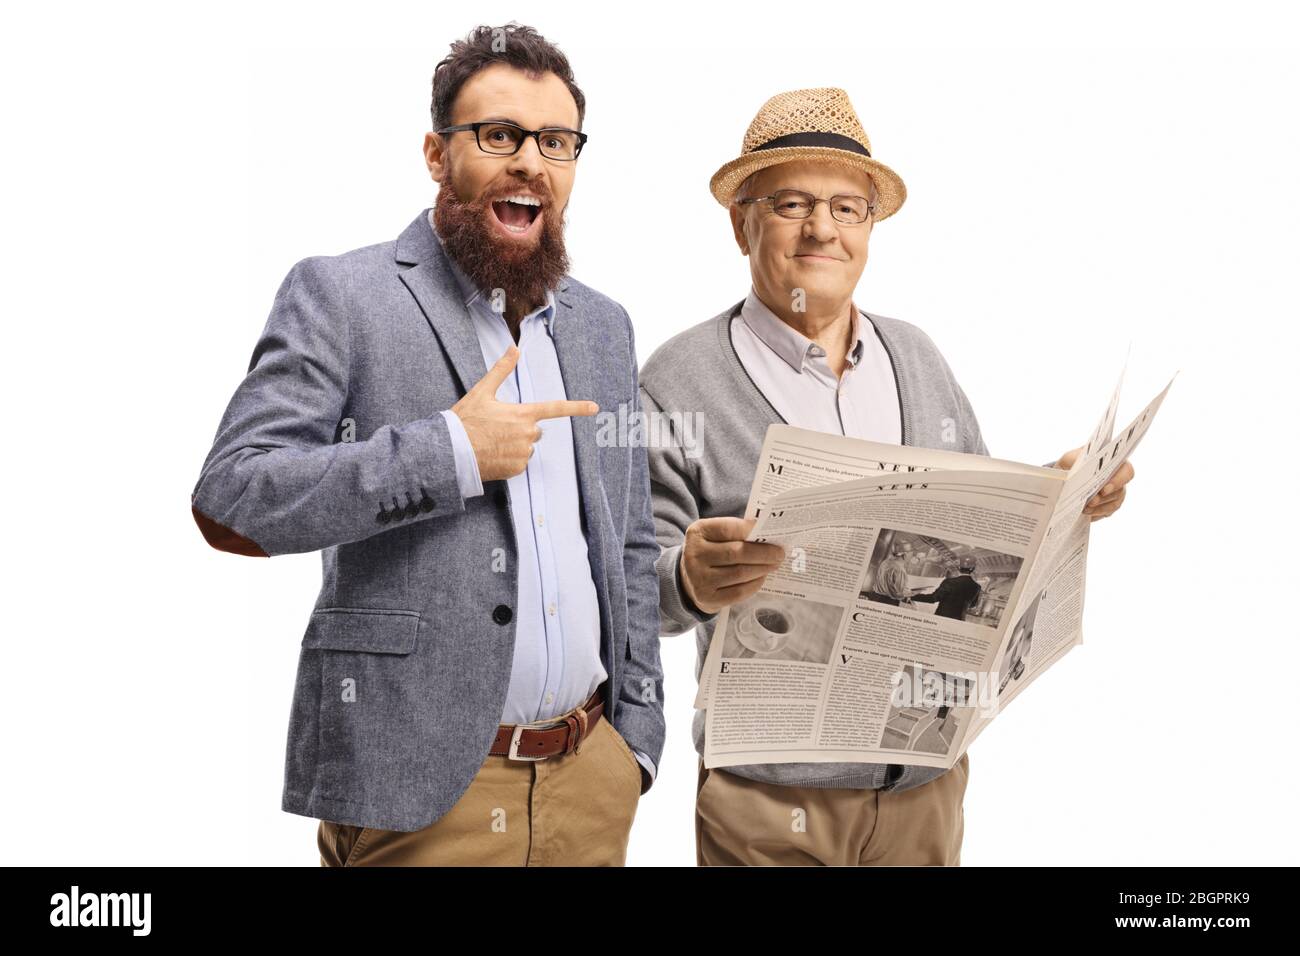 Bearded man laughing and pointing at an elderly man with a newspaper isolated on white background Stock Photo